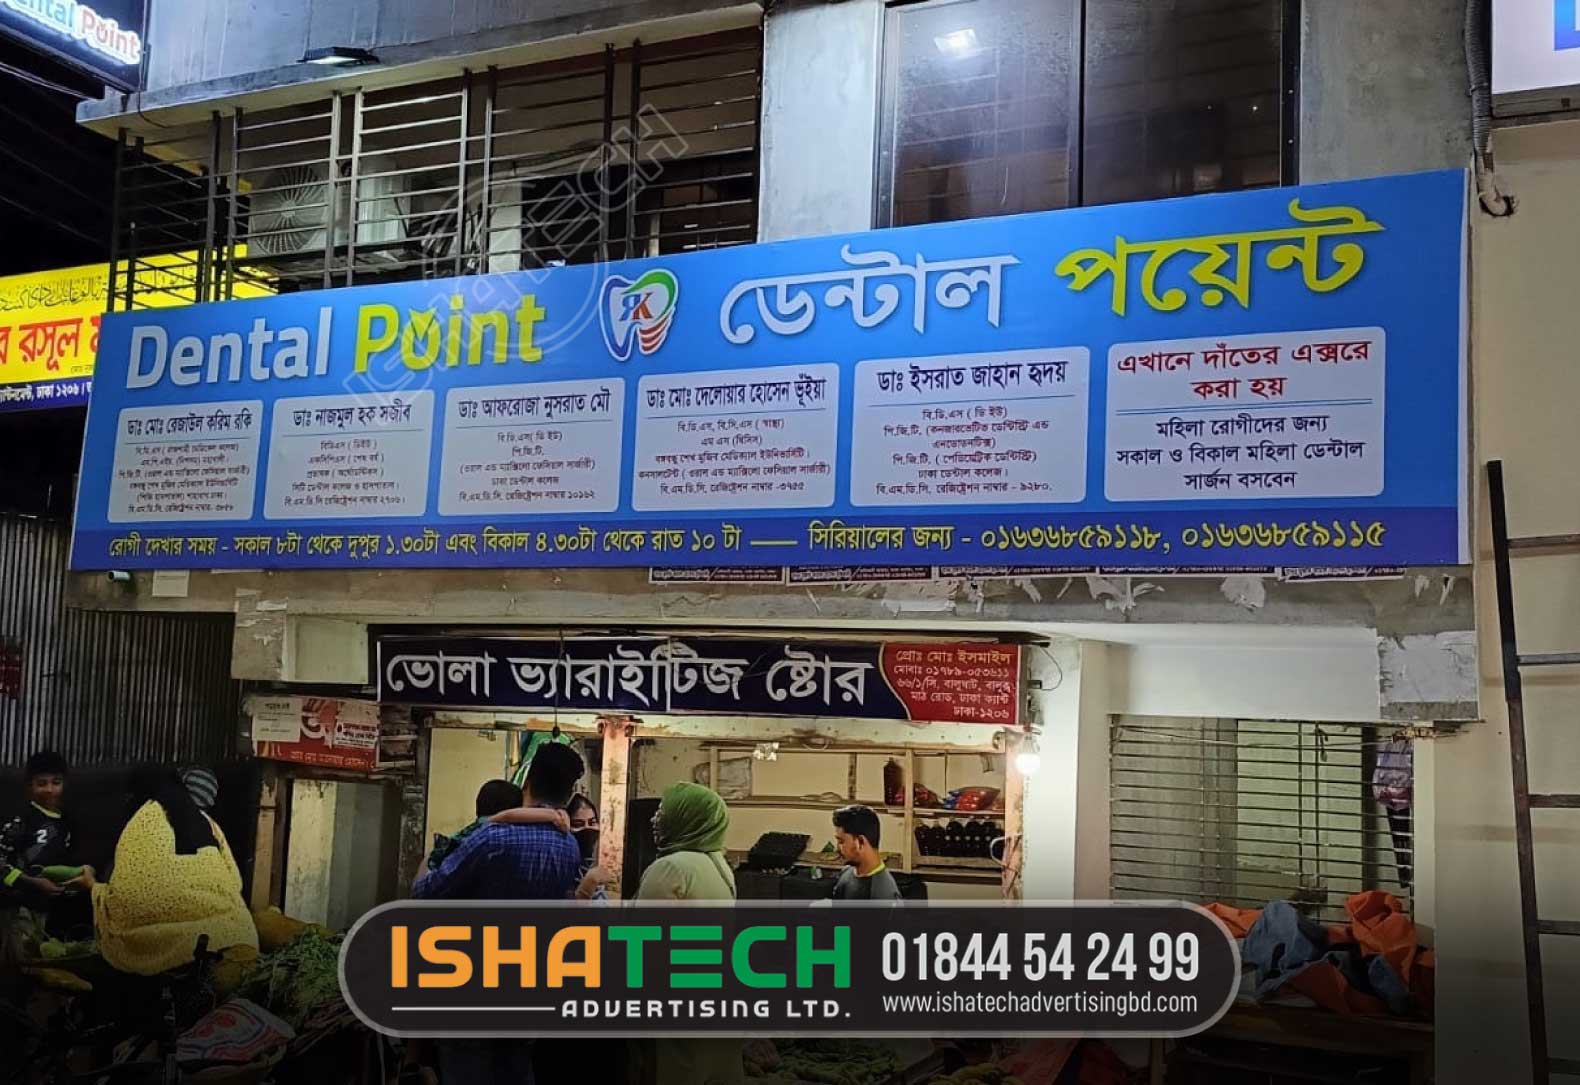 The pricing of led sign boards, pvc sign boards, acrylic sign boards, led sign board bd, digital sign board prices, led display board suppliers in Bangladesh, neon sign board prices, and lighting sign boards are all available in Bangladesh.